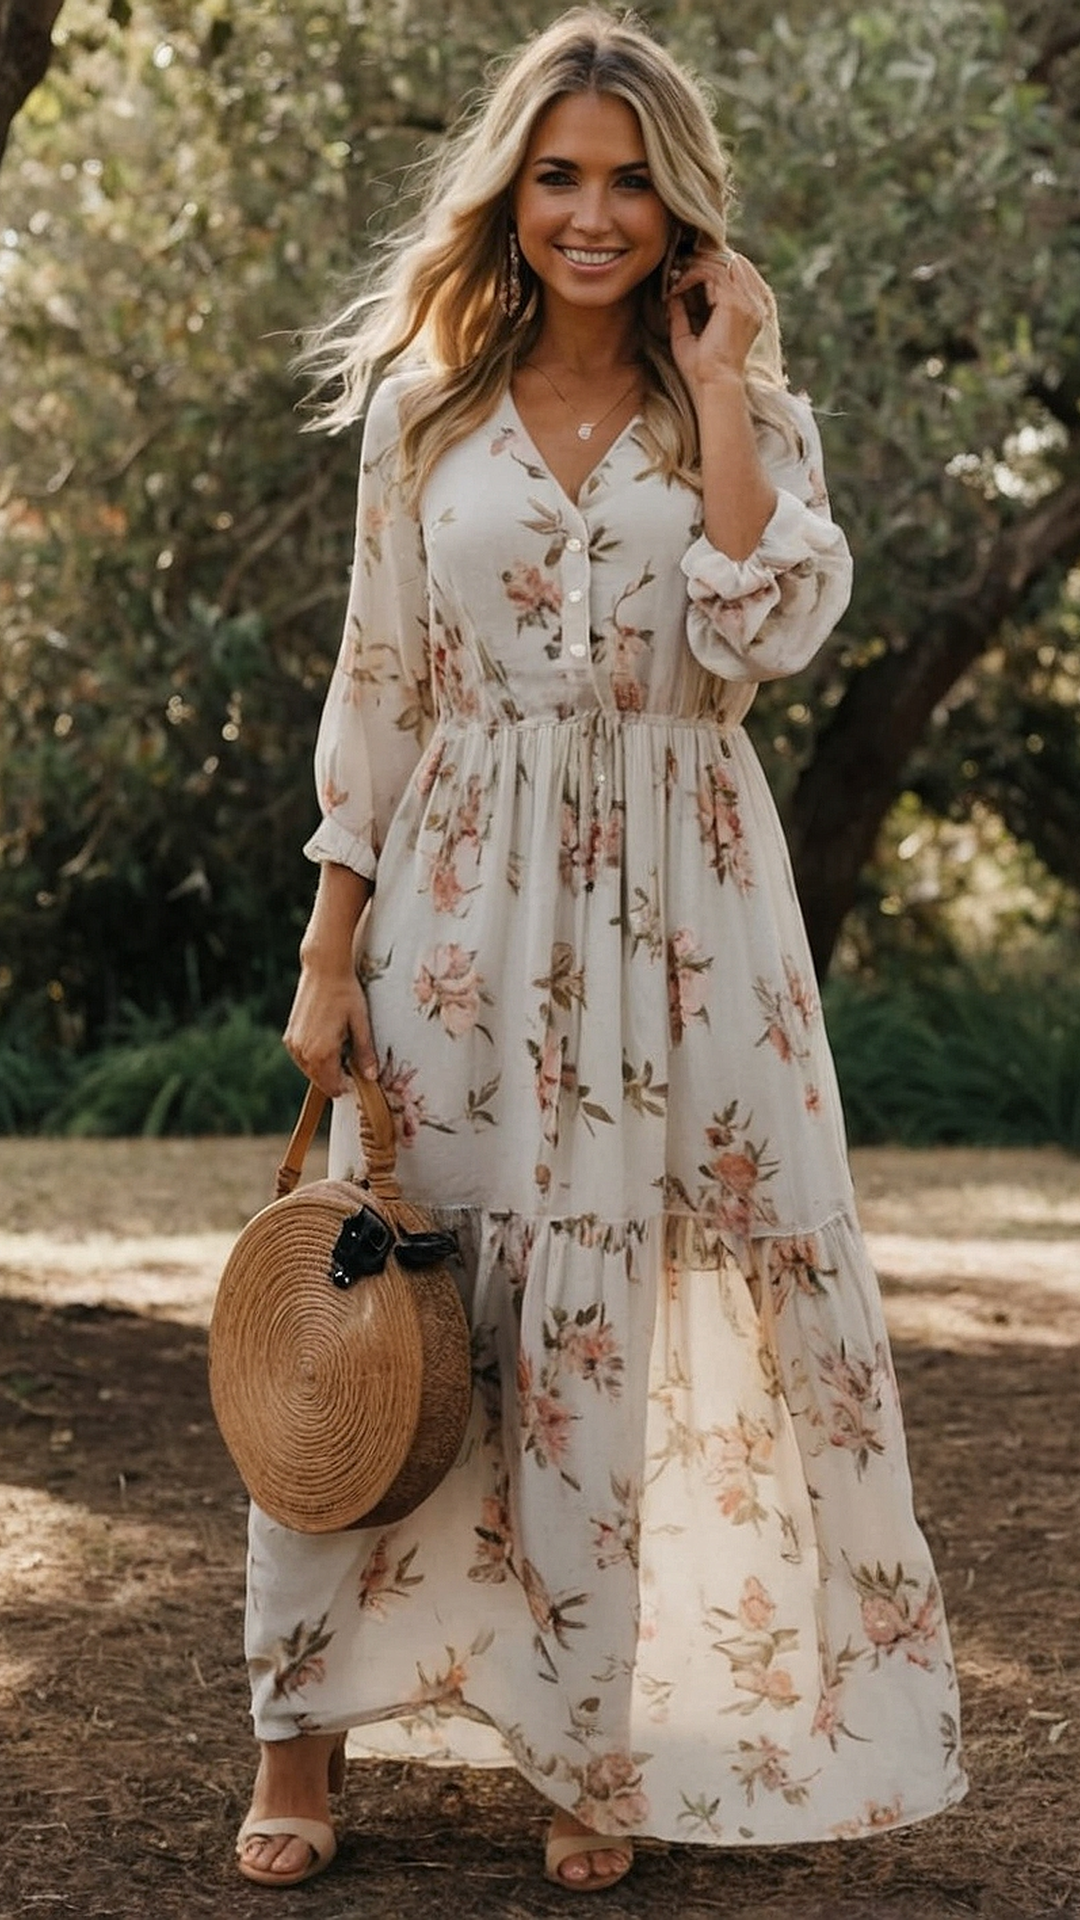 Blooming Beauties: Floral Maxi Dresses Galore